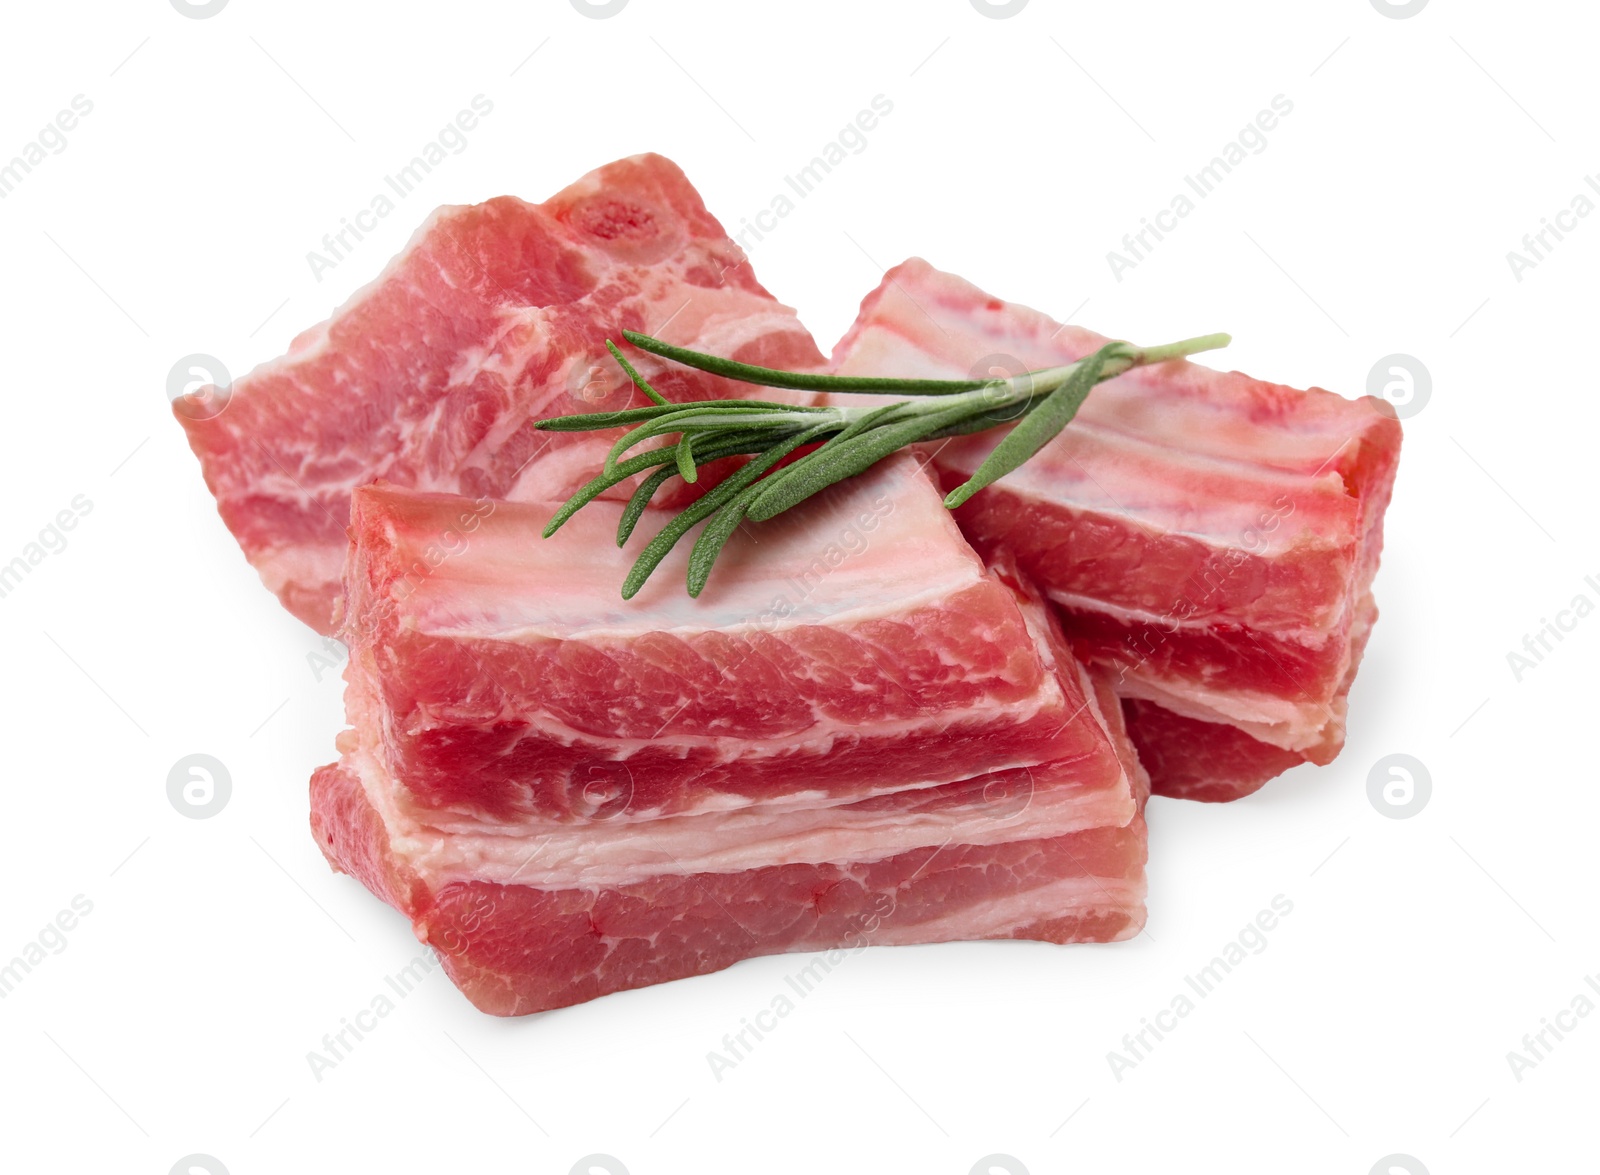 Photo of Cut raw pork ribs with rosemary isolated on white